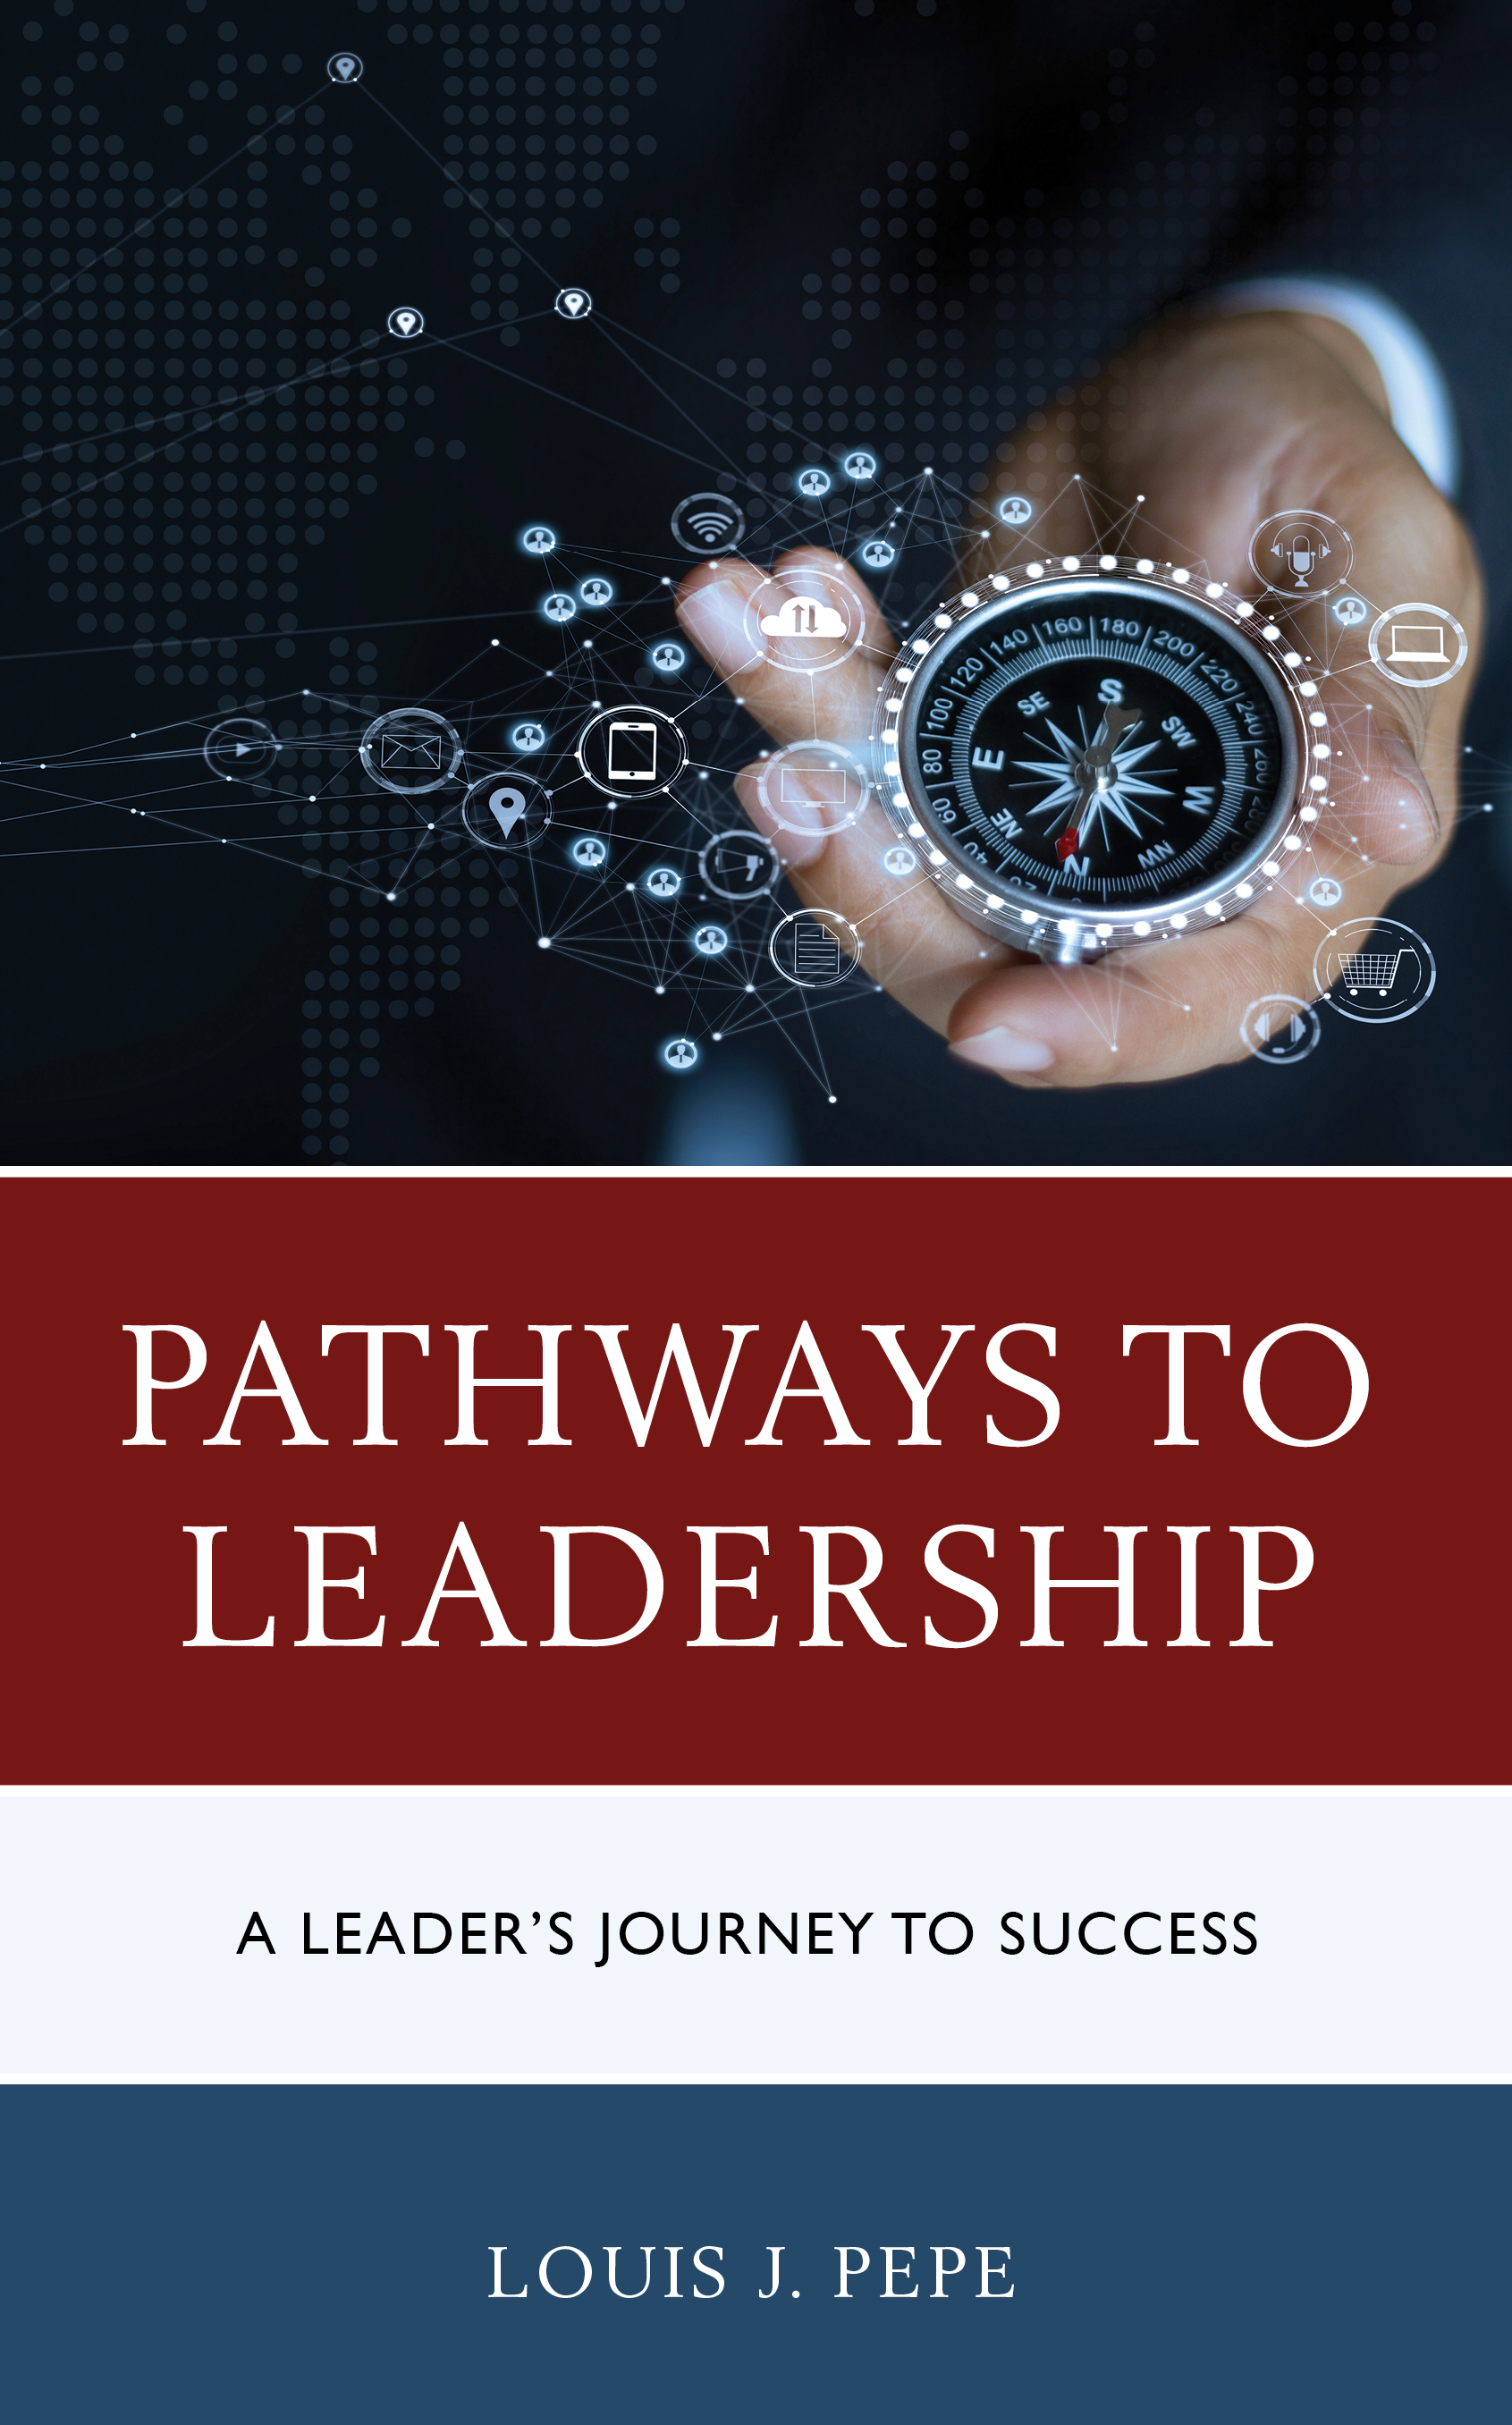 Pathways to Leadership: A Leader’s Journey to Success